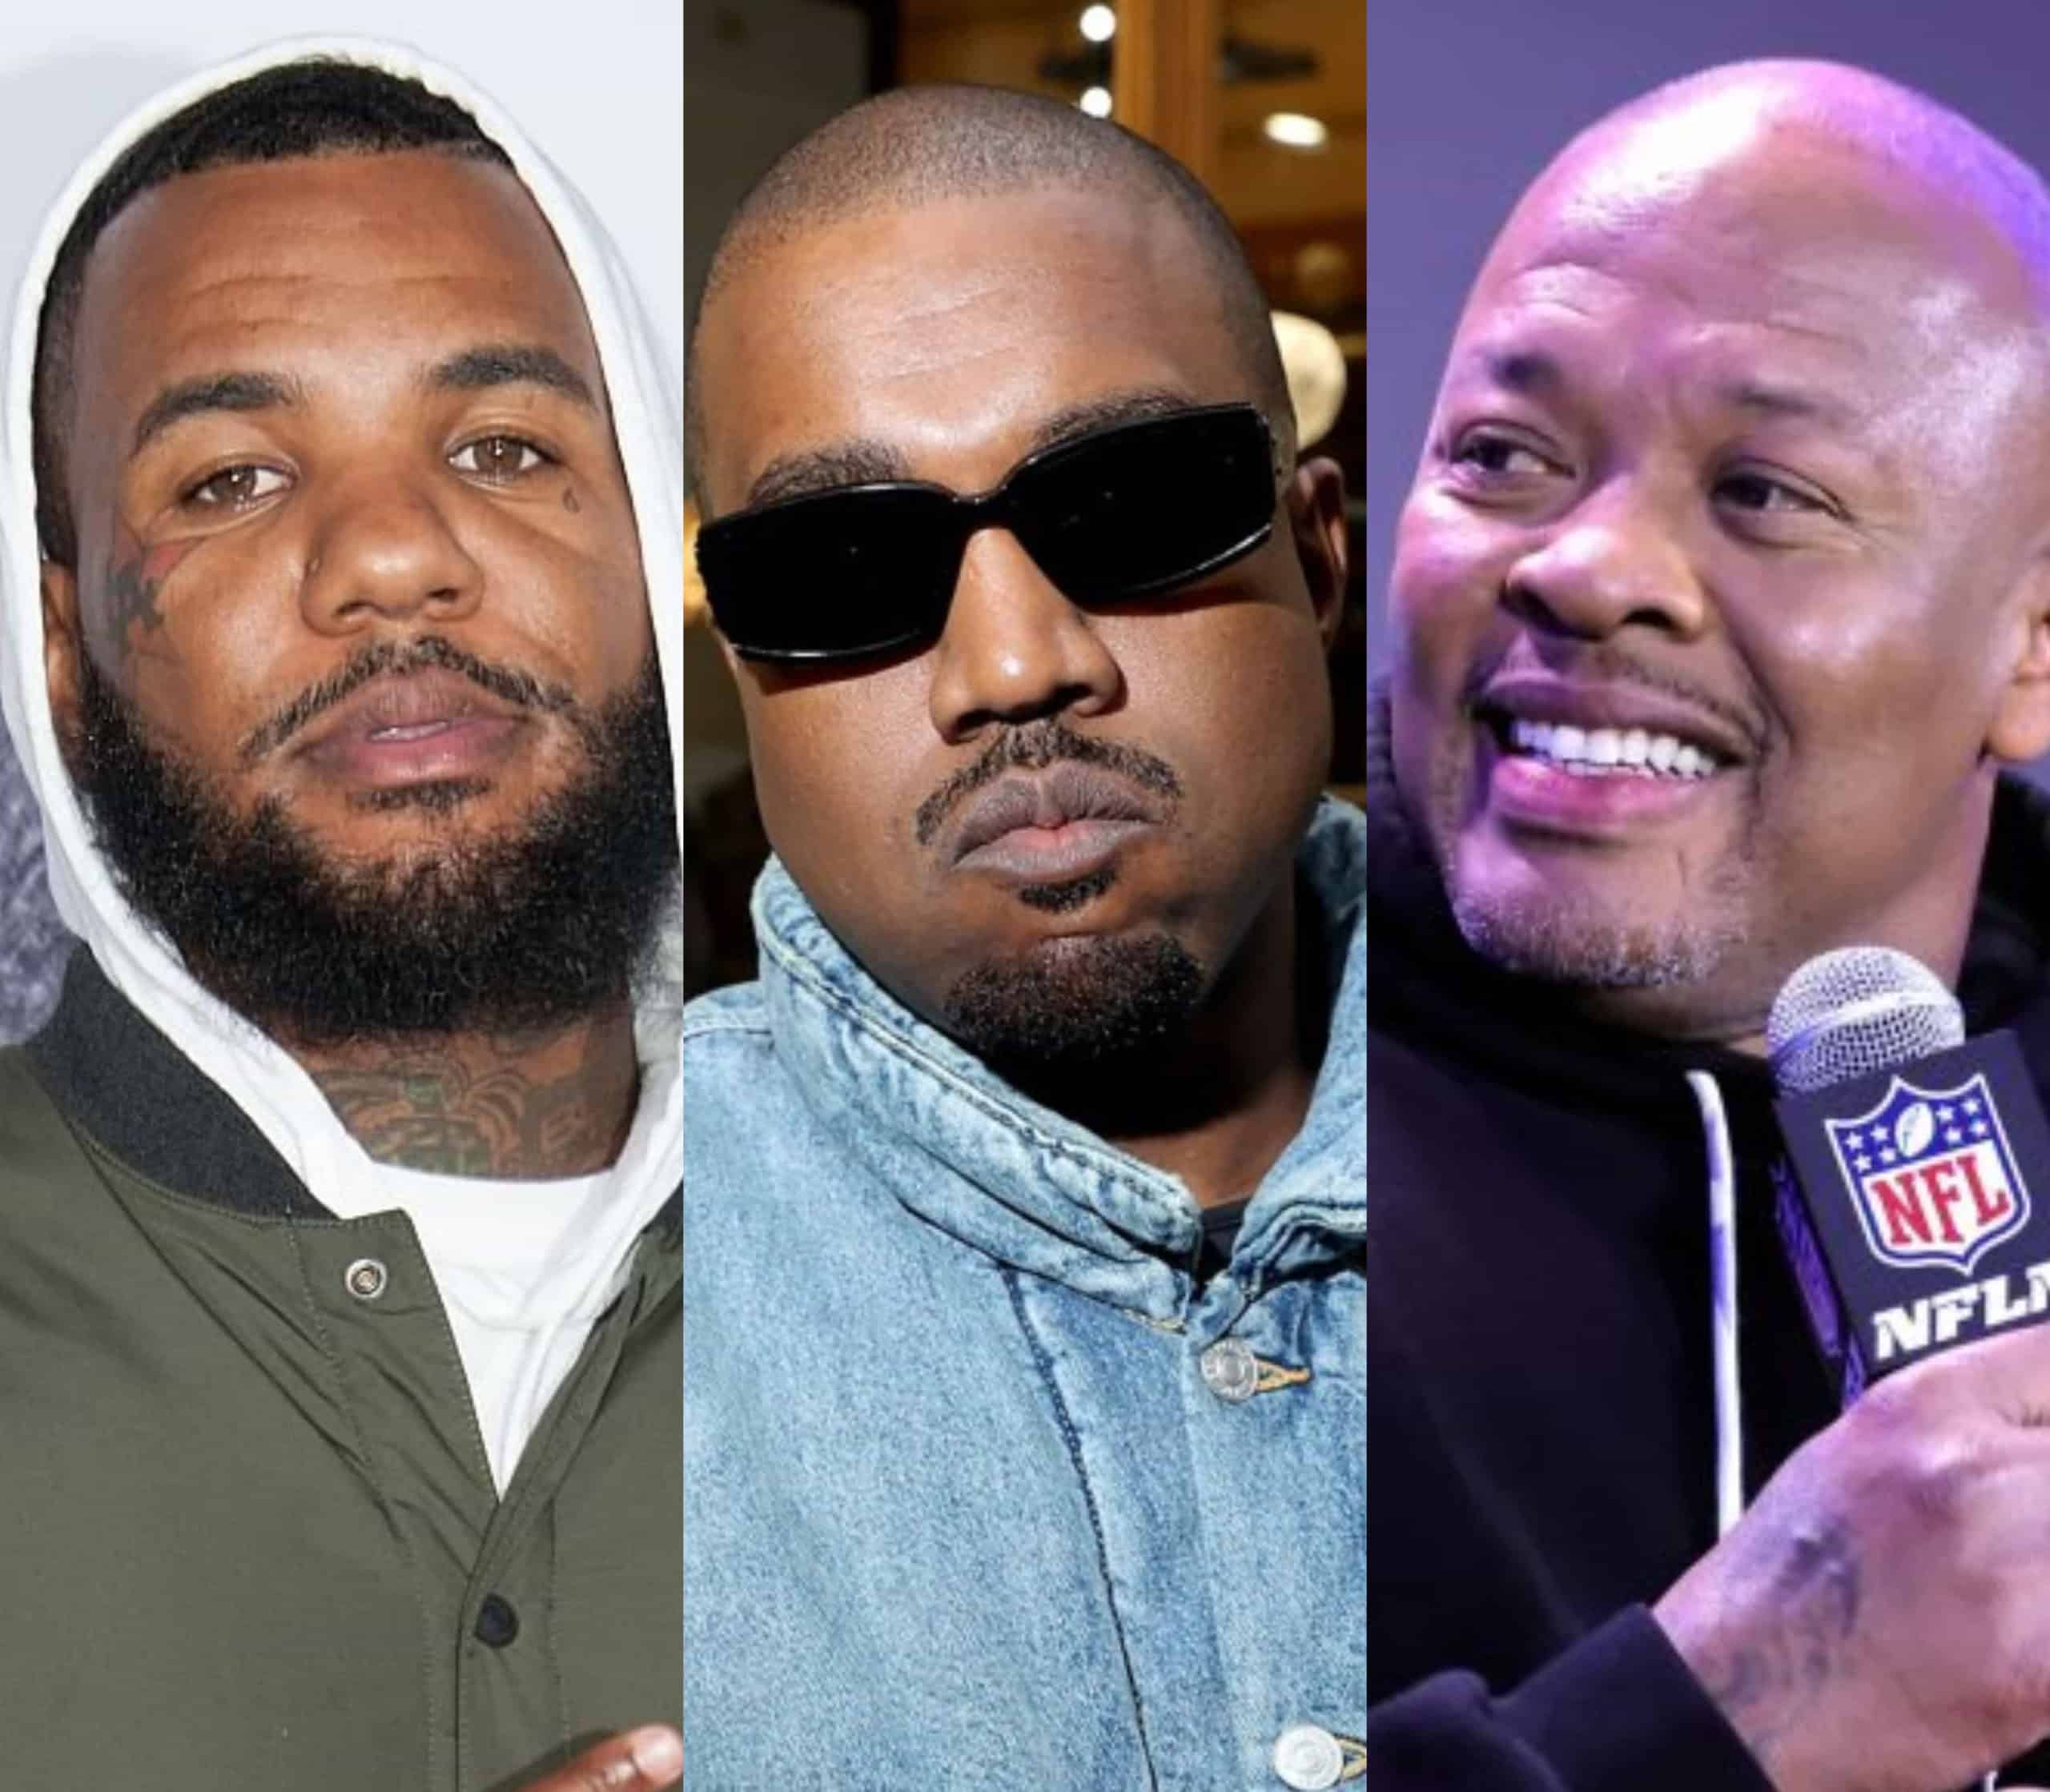 The Game Says Kanye West Did More For Him in 2 Weeks Than Dr. Dre Did In His Entire Career